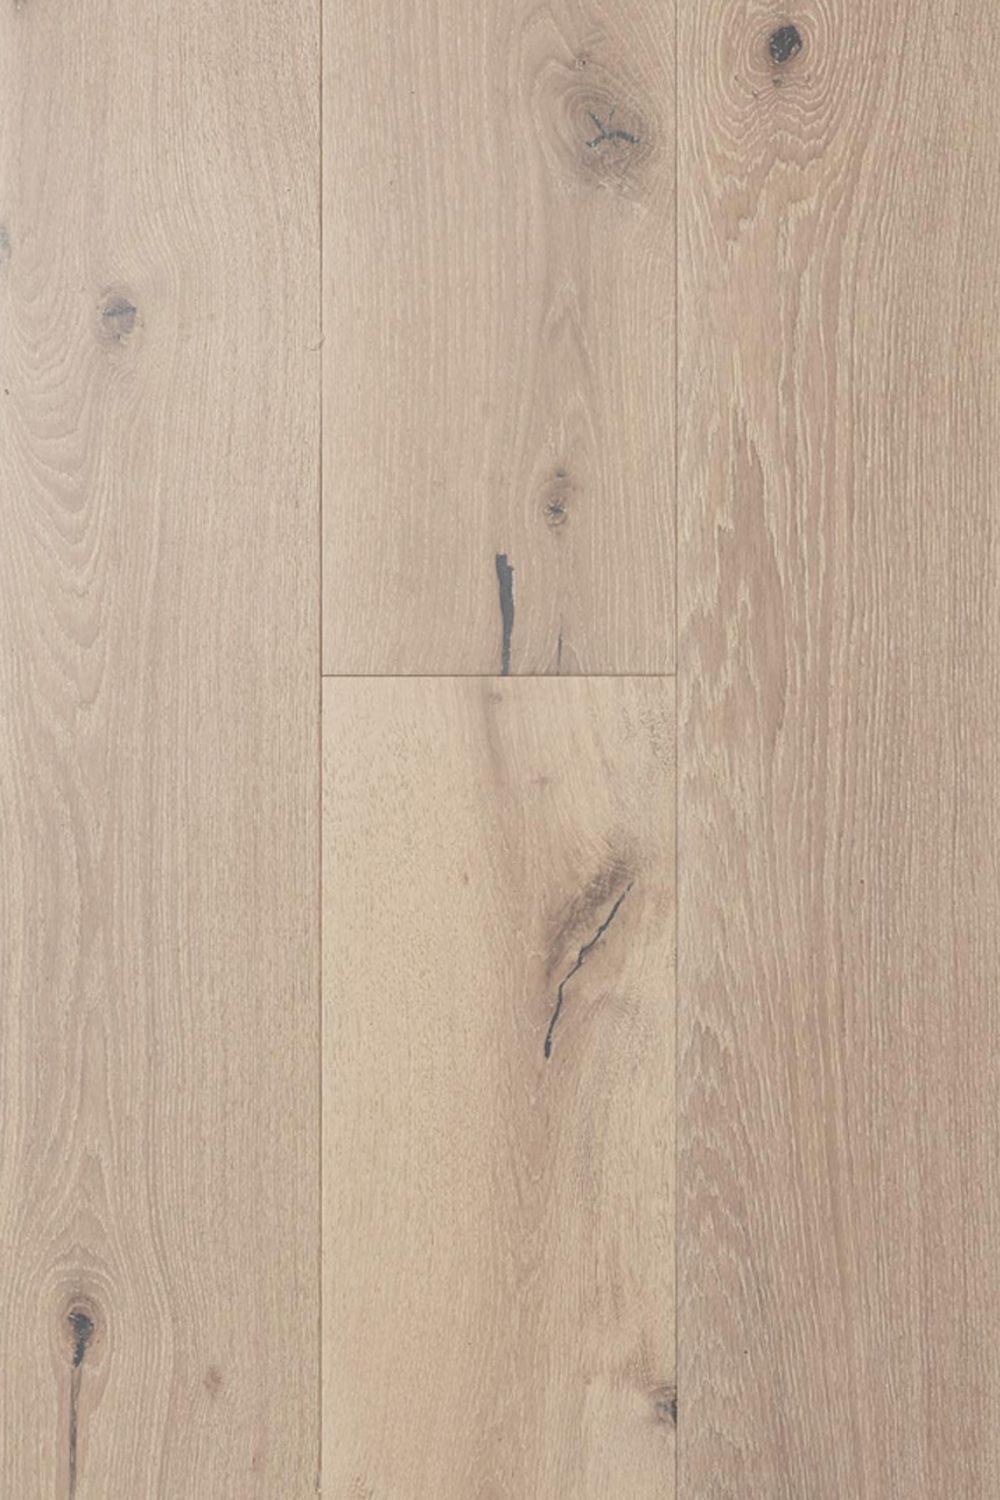 Everything You Need to Know About Engineered Hardwood Flooring